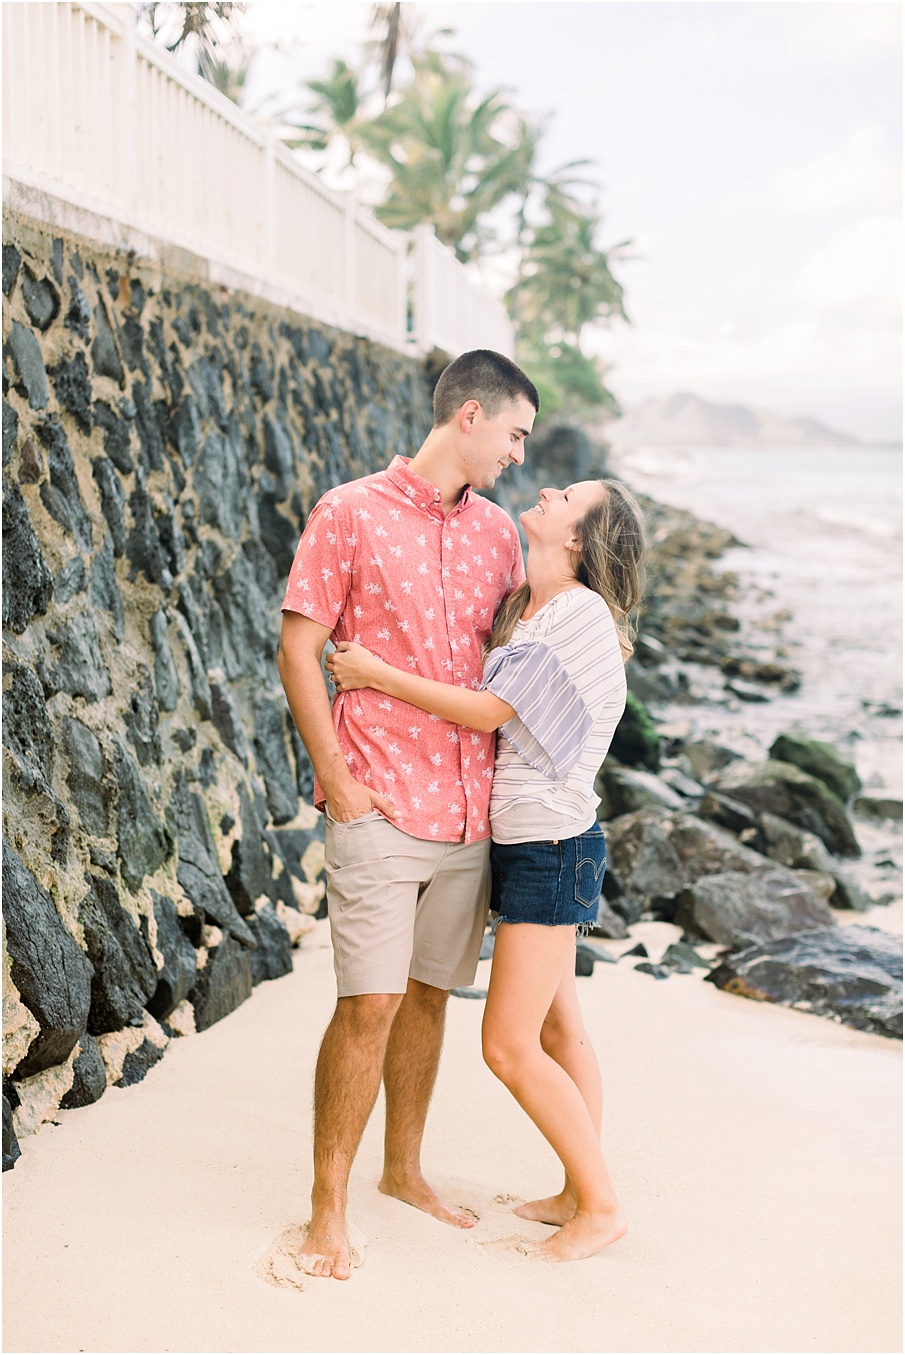 An Oahu based couple's Lanikai beach engagement session. Beautiful palm trees, rocks, and a calm ocean.